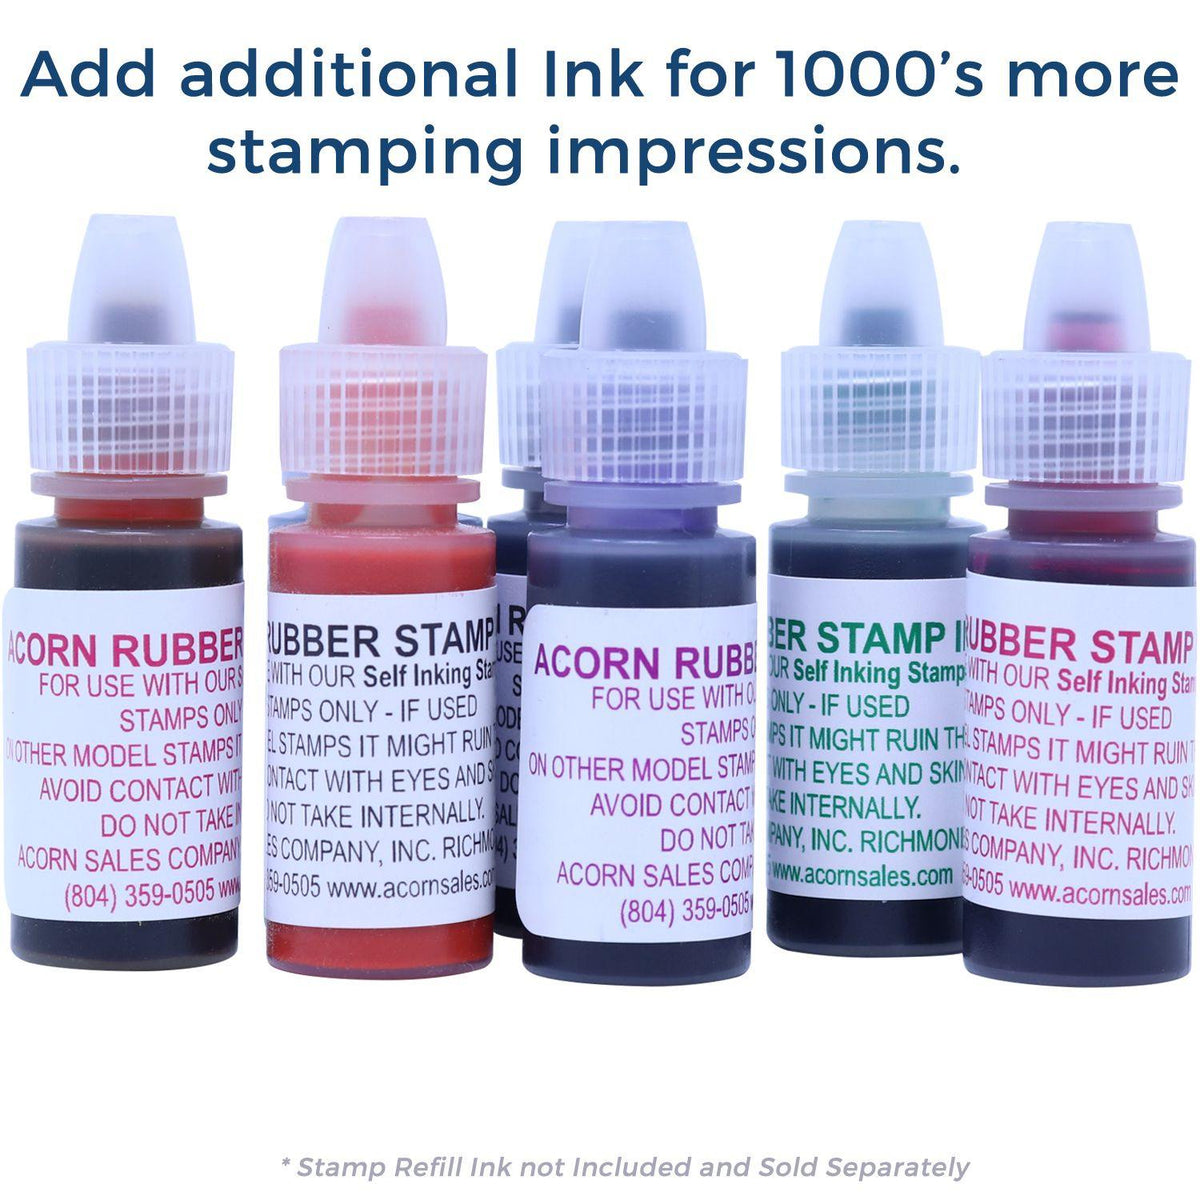 Refill Inks for Large Pre-Inked Copia Stamp Available